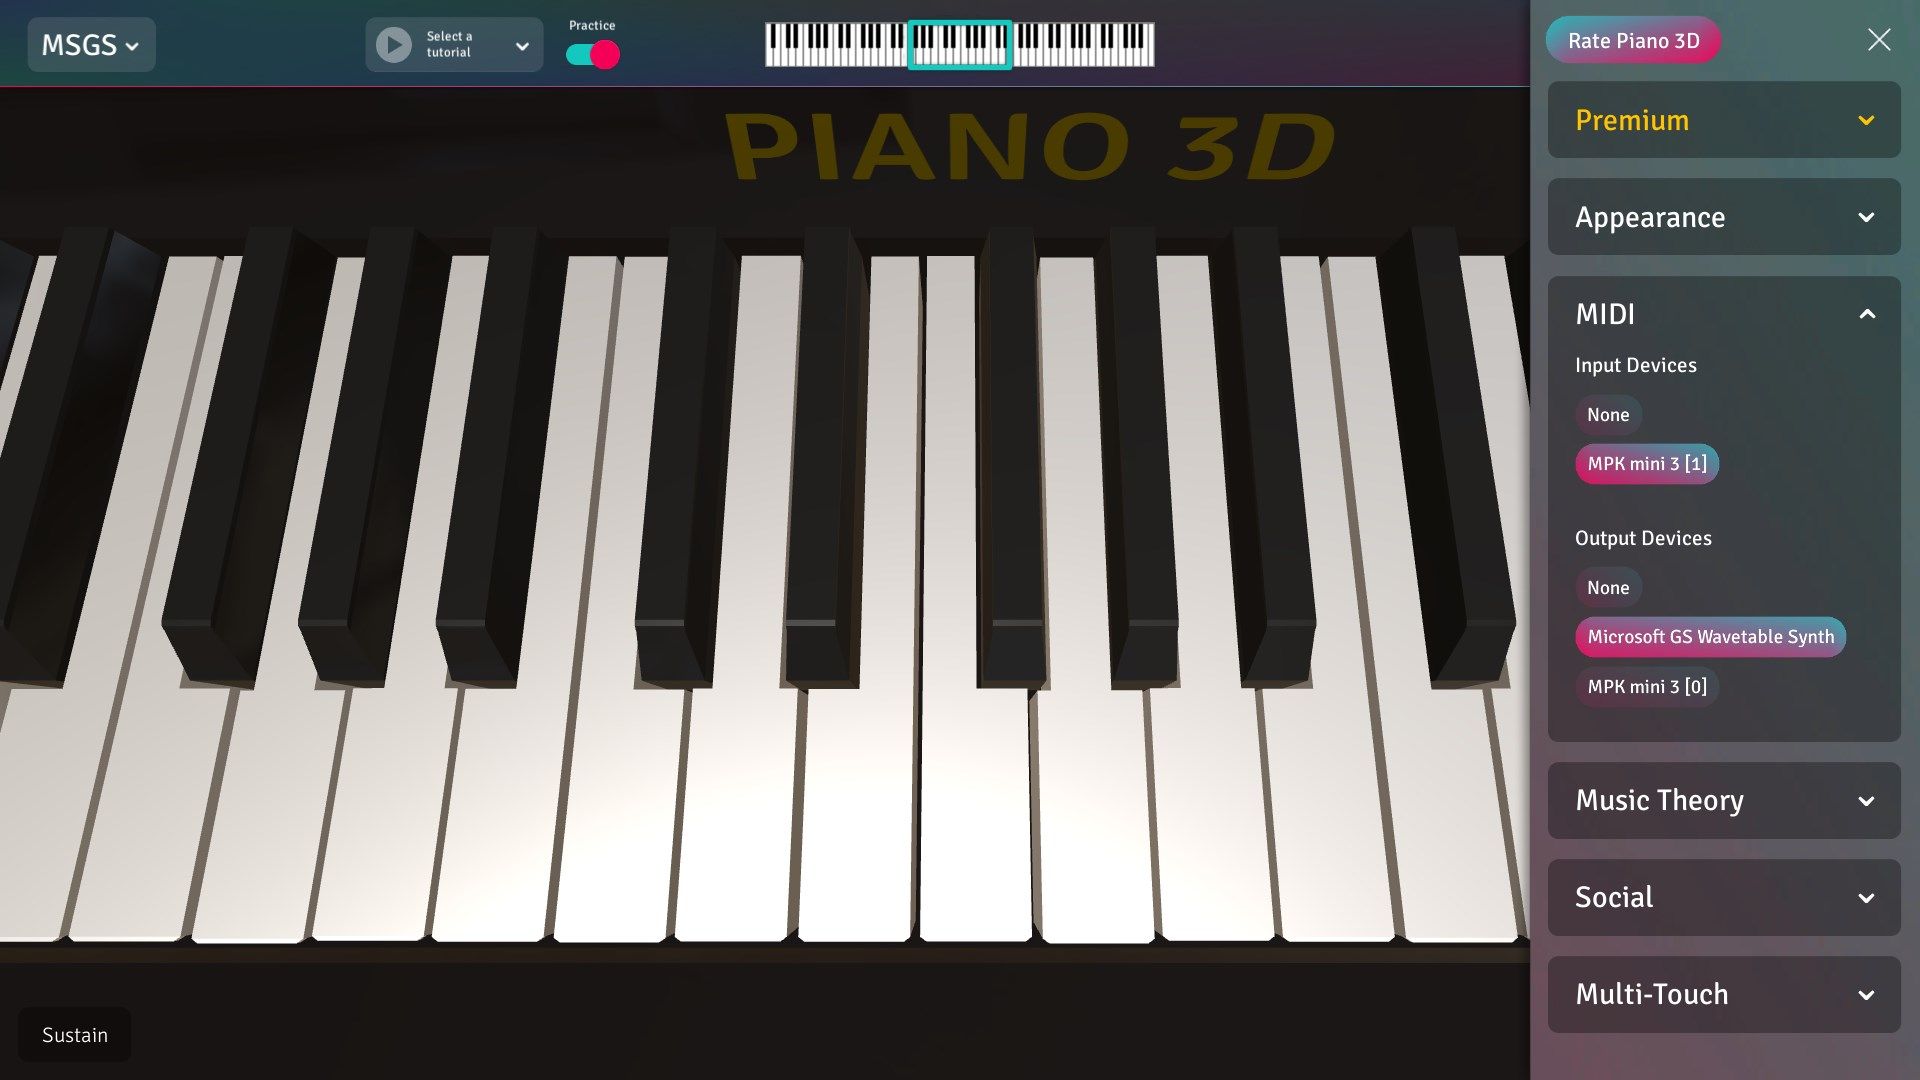 Use your MIDI devices from Piano 3D